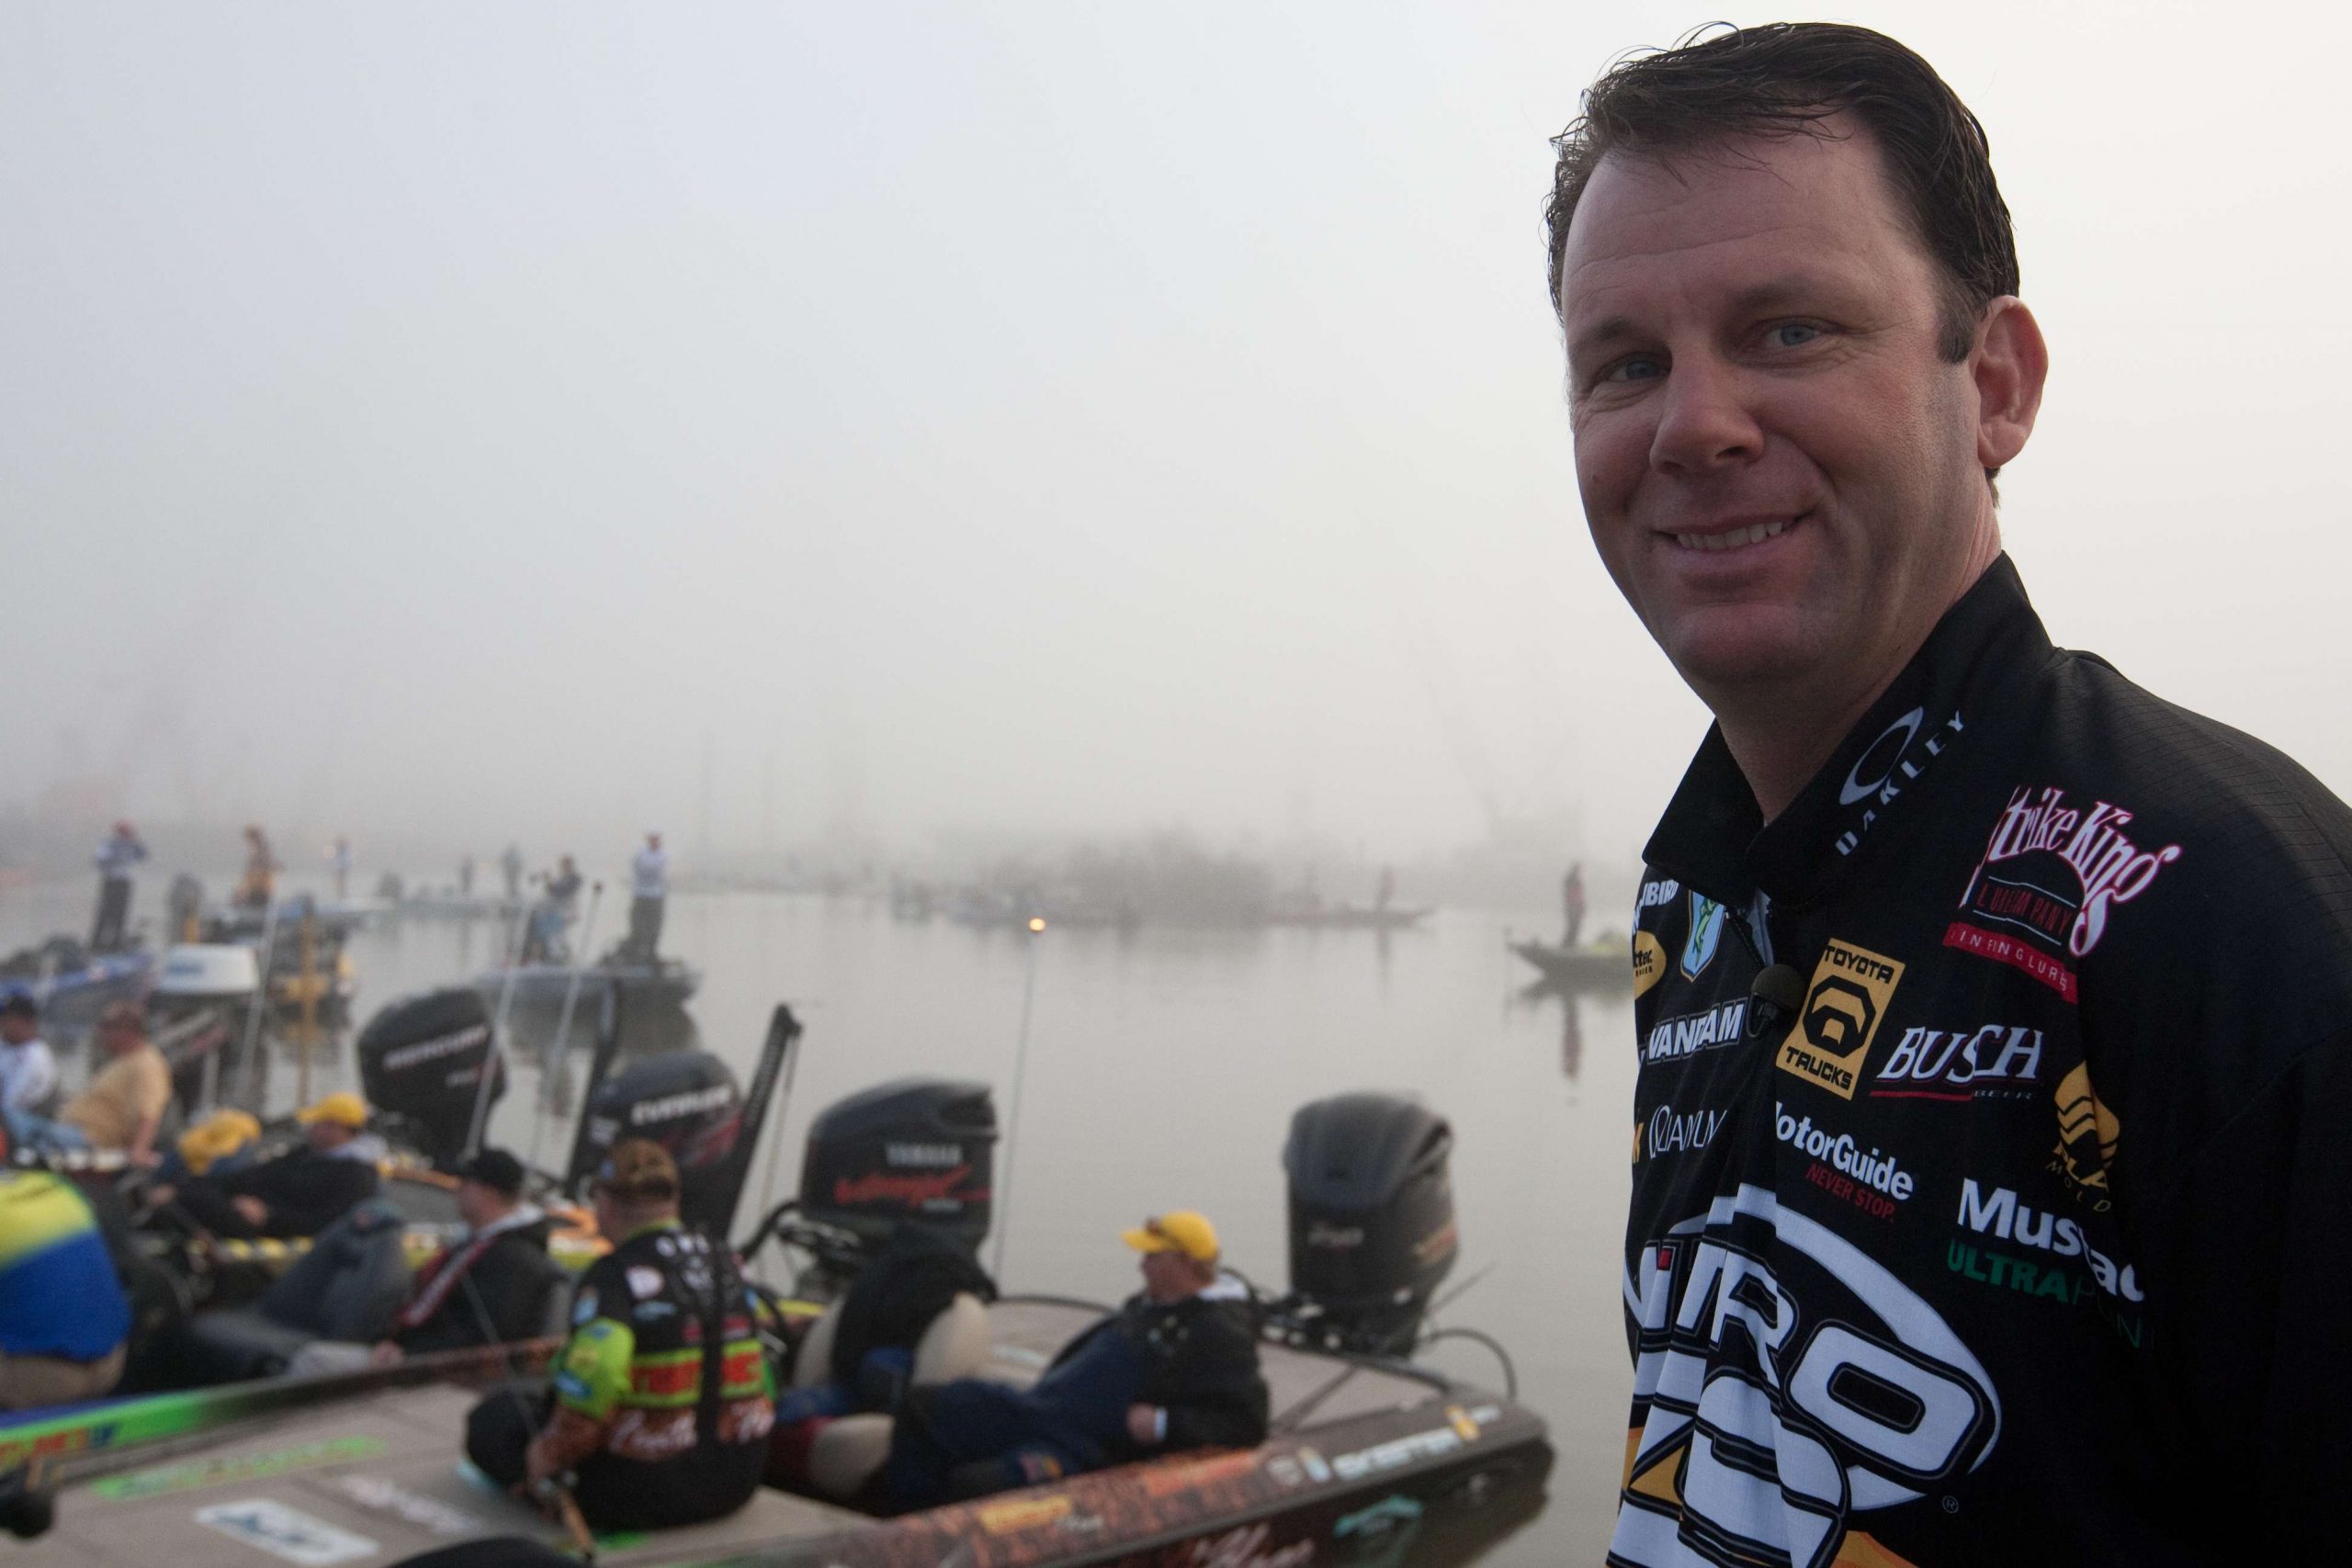 Returning to the Louisiana Delta, where he won his first Classic in 2001, VanDam won his fourth Classic title in 2011.